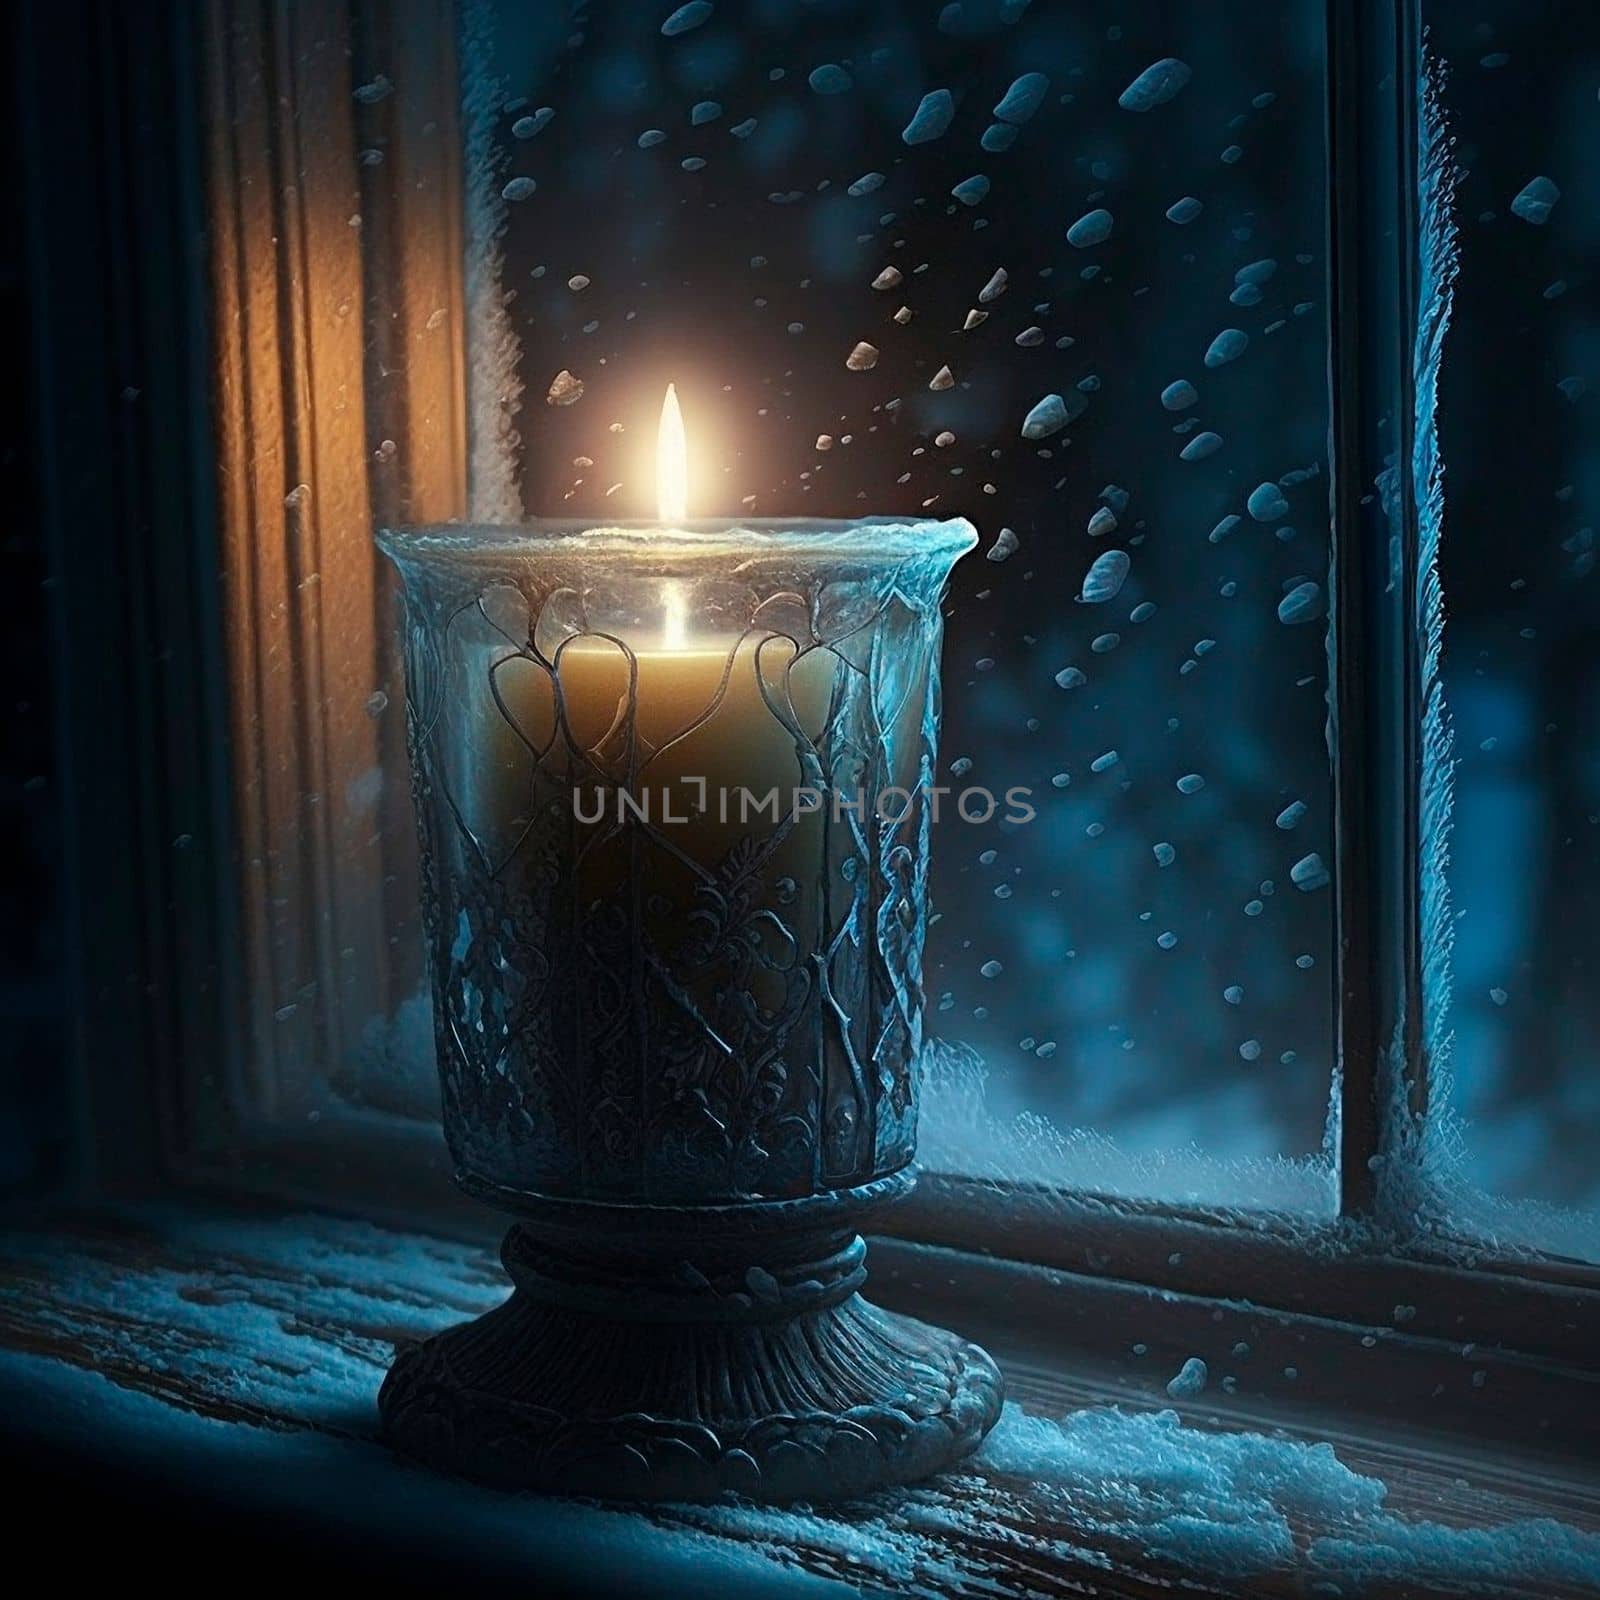 A candle in a glass by a frozen window by NeuroSky